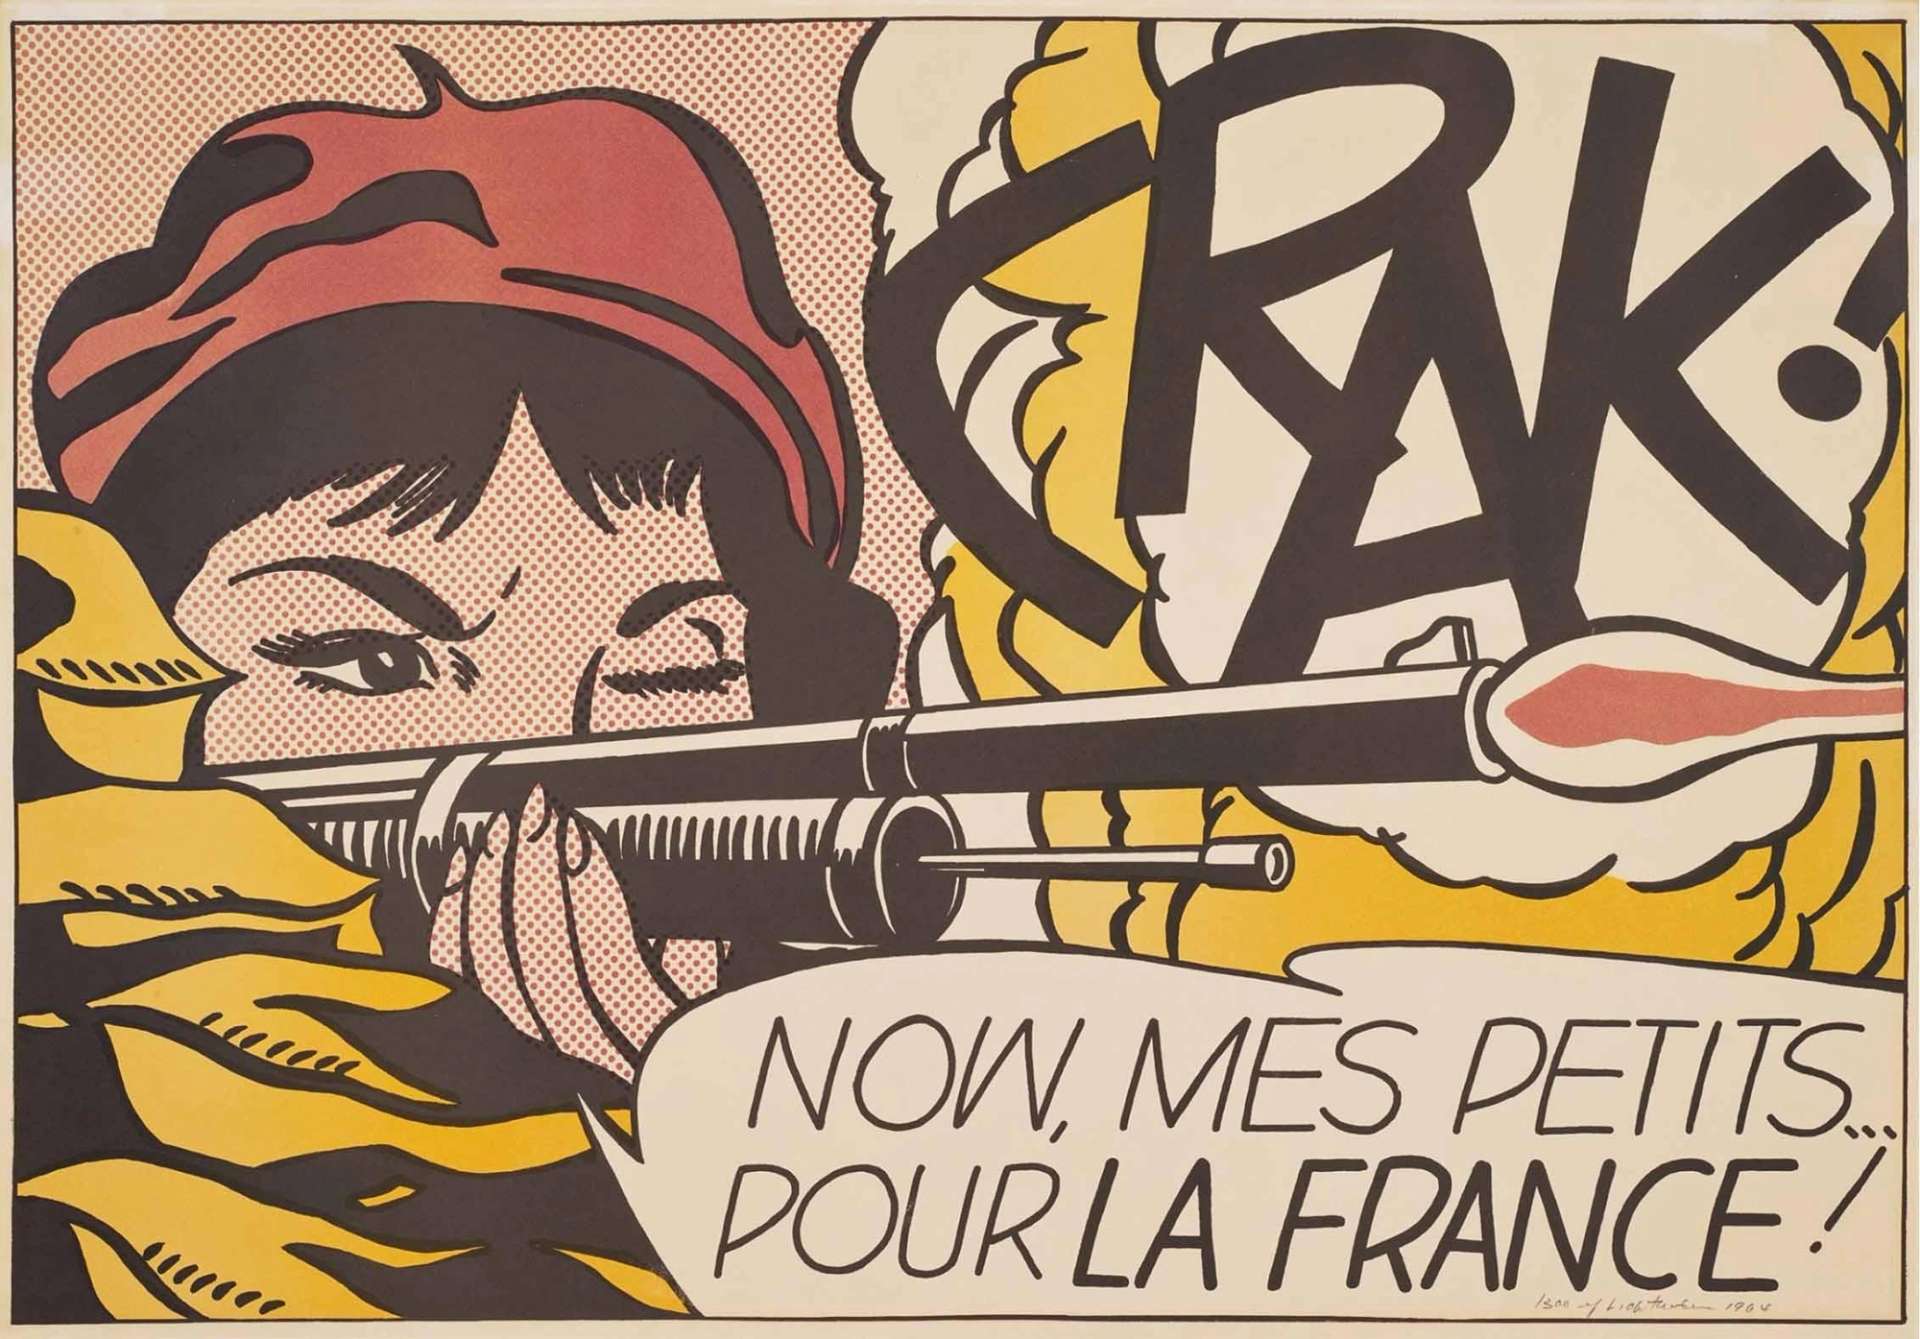 A lithograph by Roy Lichtenstein depicting a cartoon scene, with a woman holding a gun on the left side of the composition and the words CRAK in a speech bubble to the right.